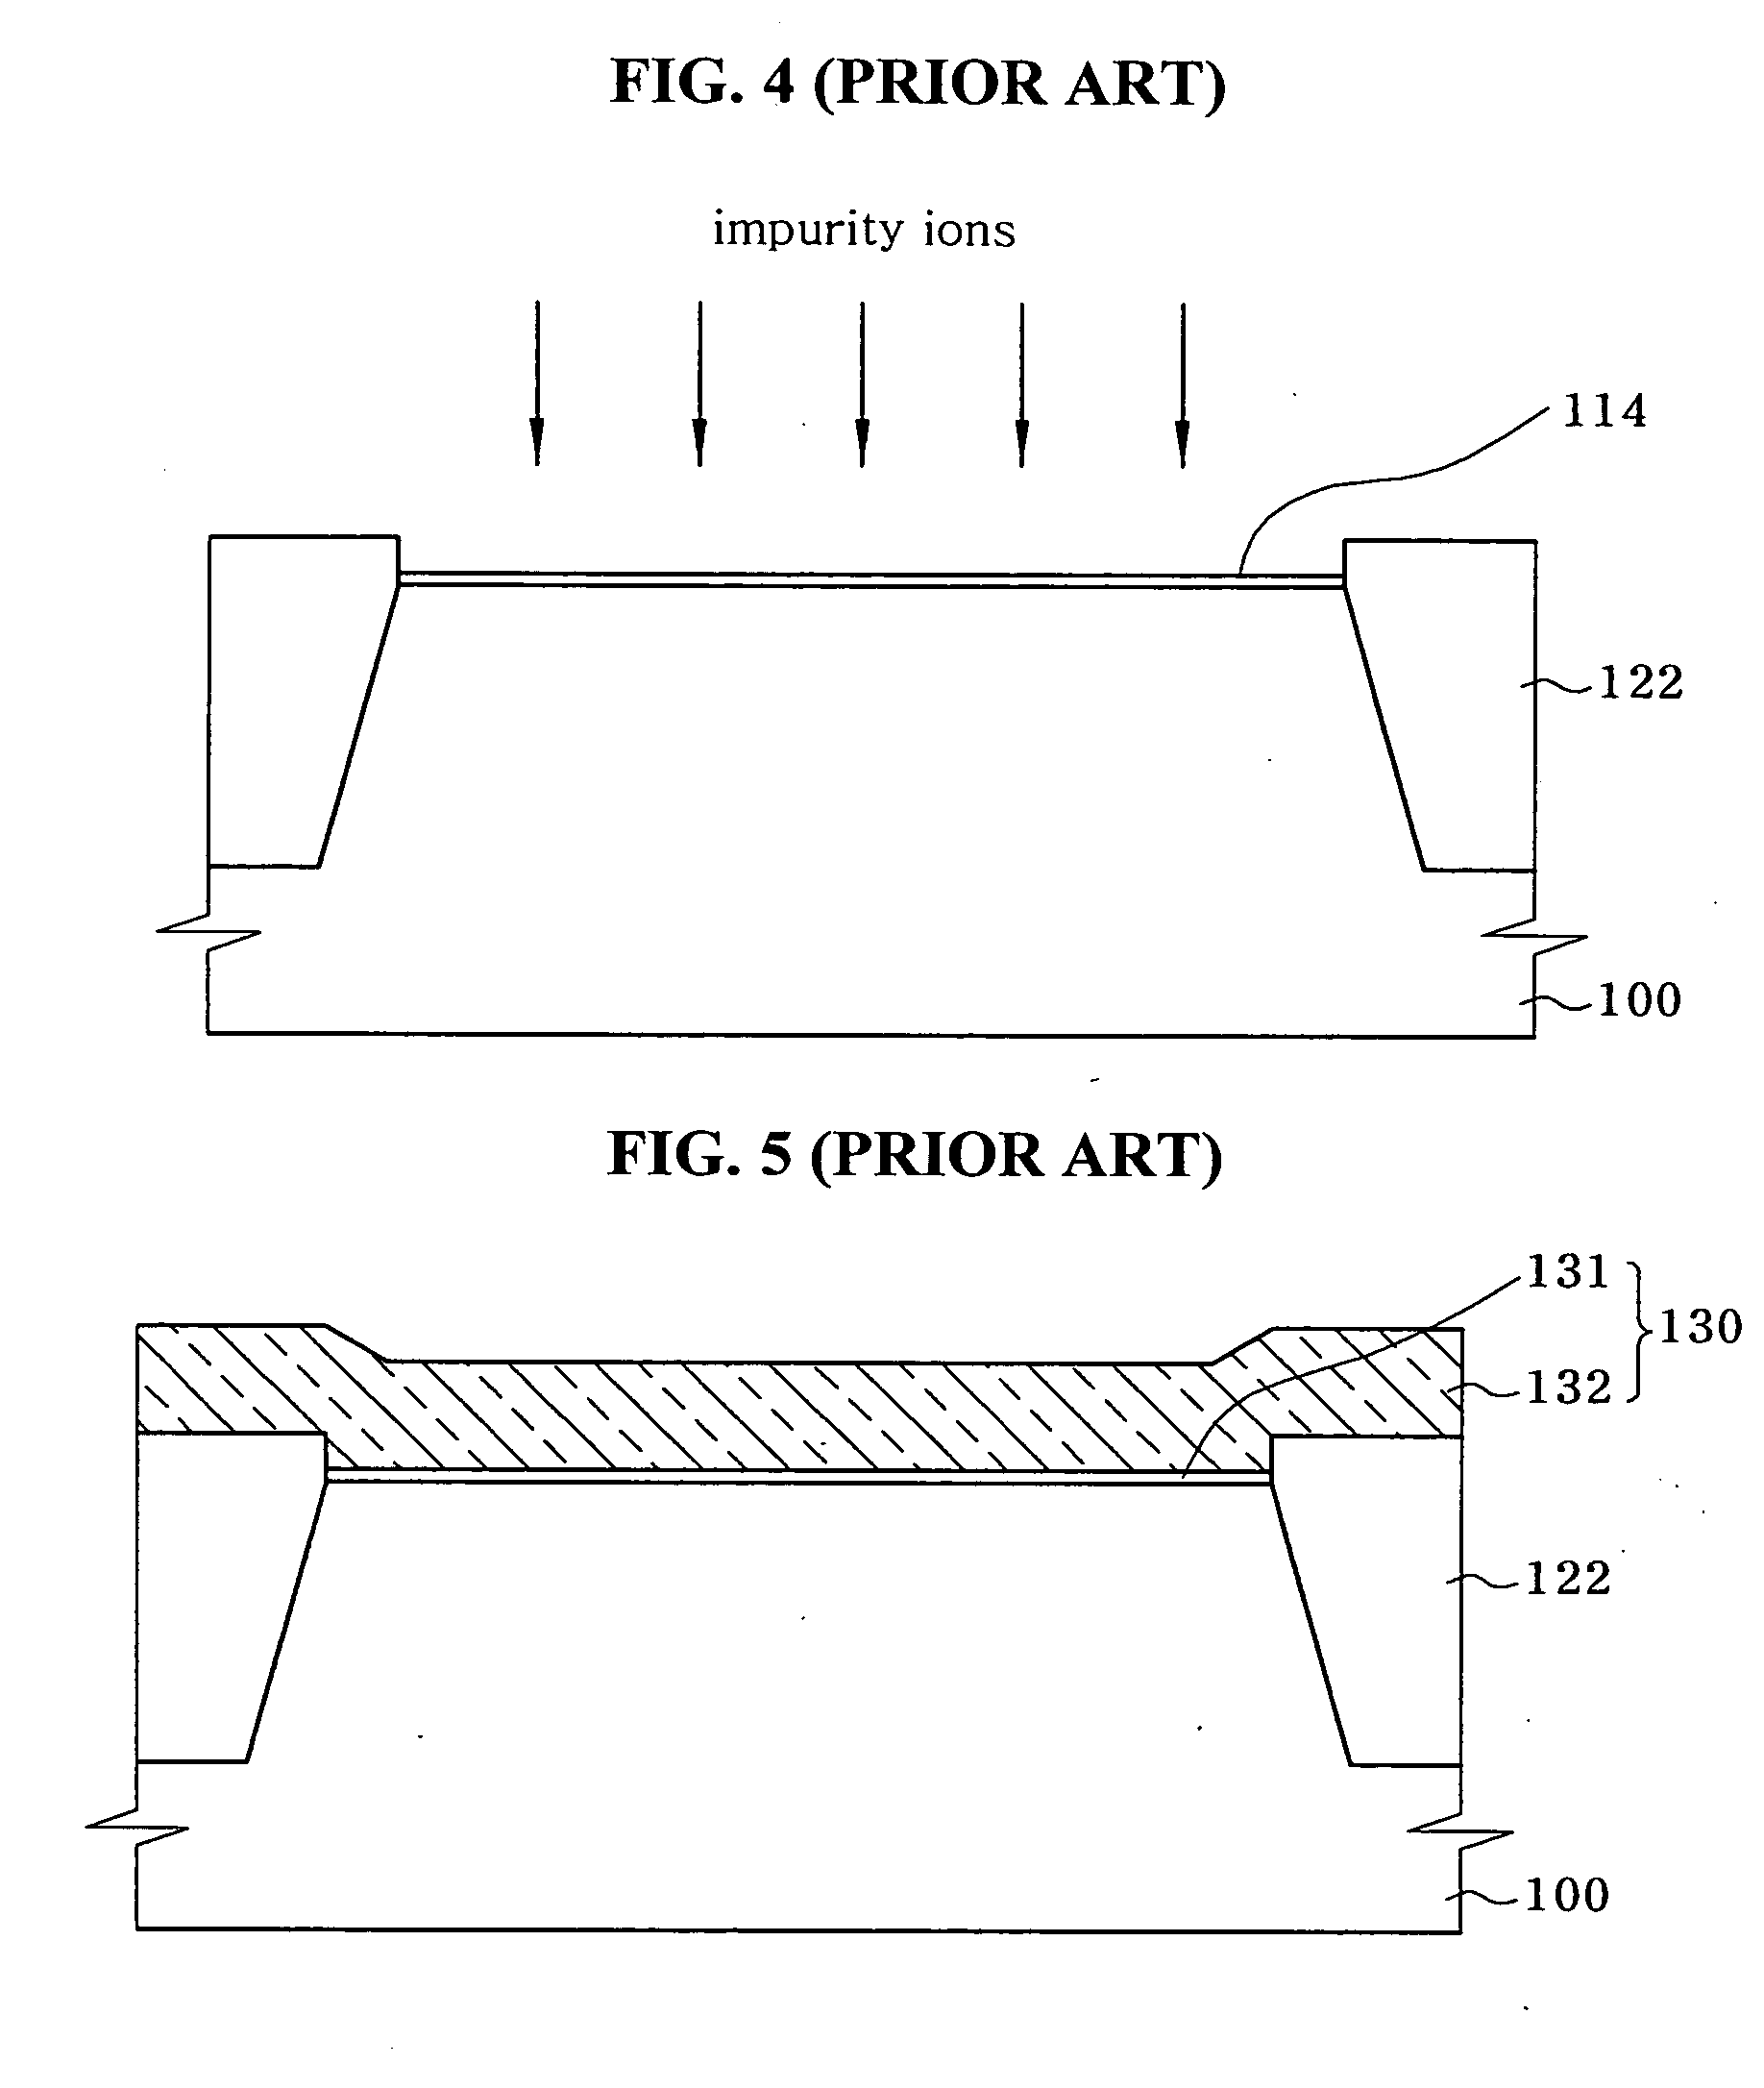 Method for fabricating semiconductor device with metal-polycide gate and recessed channel